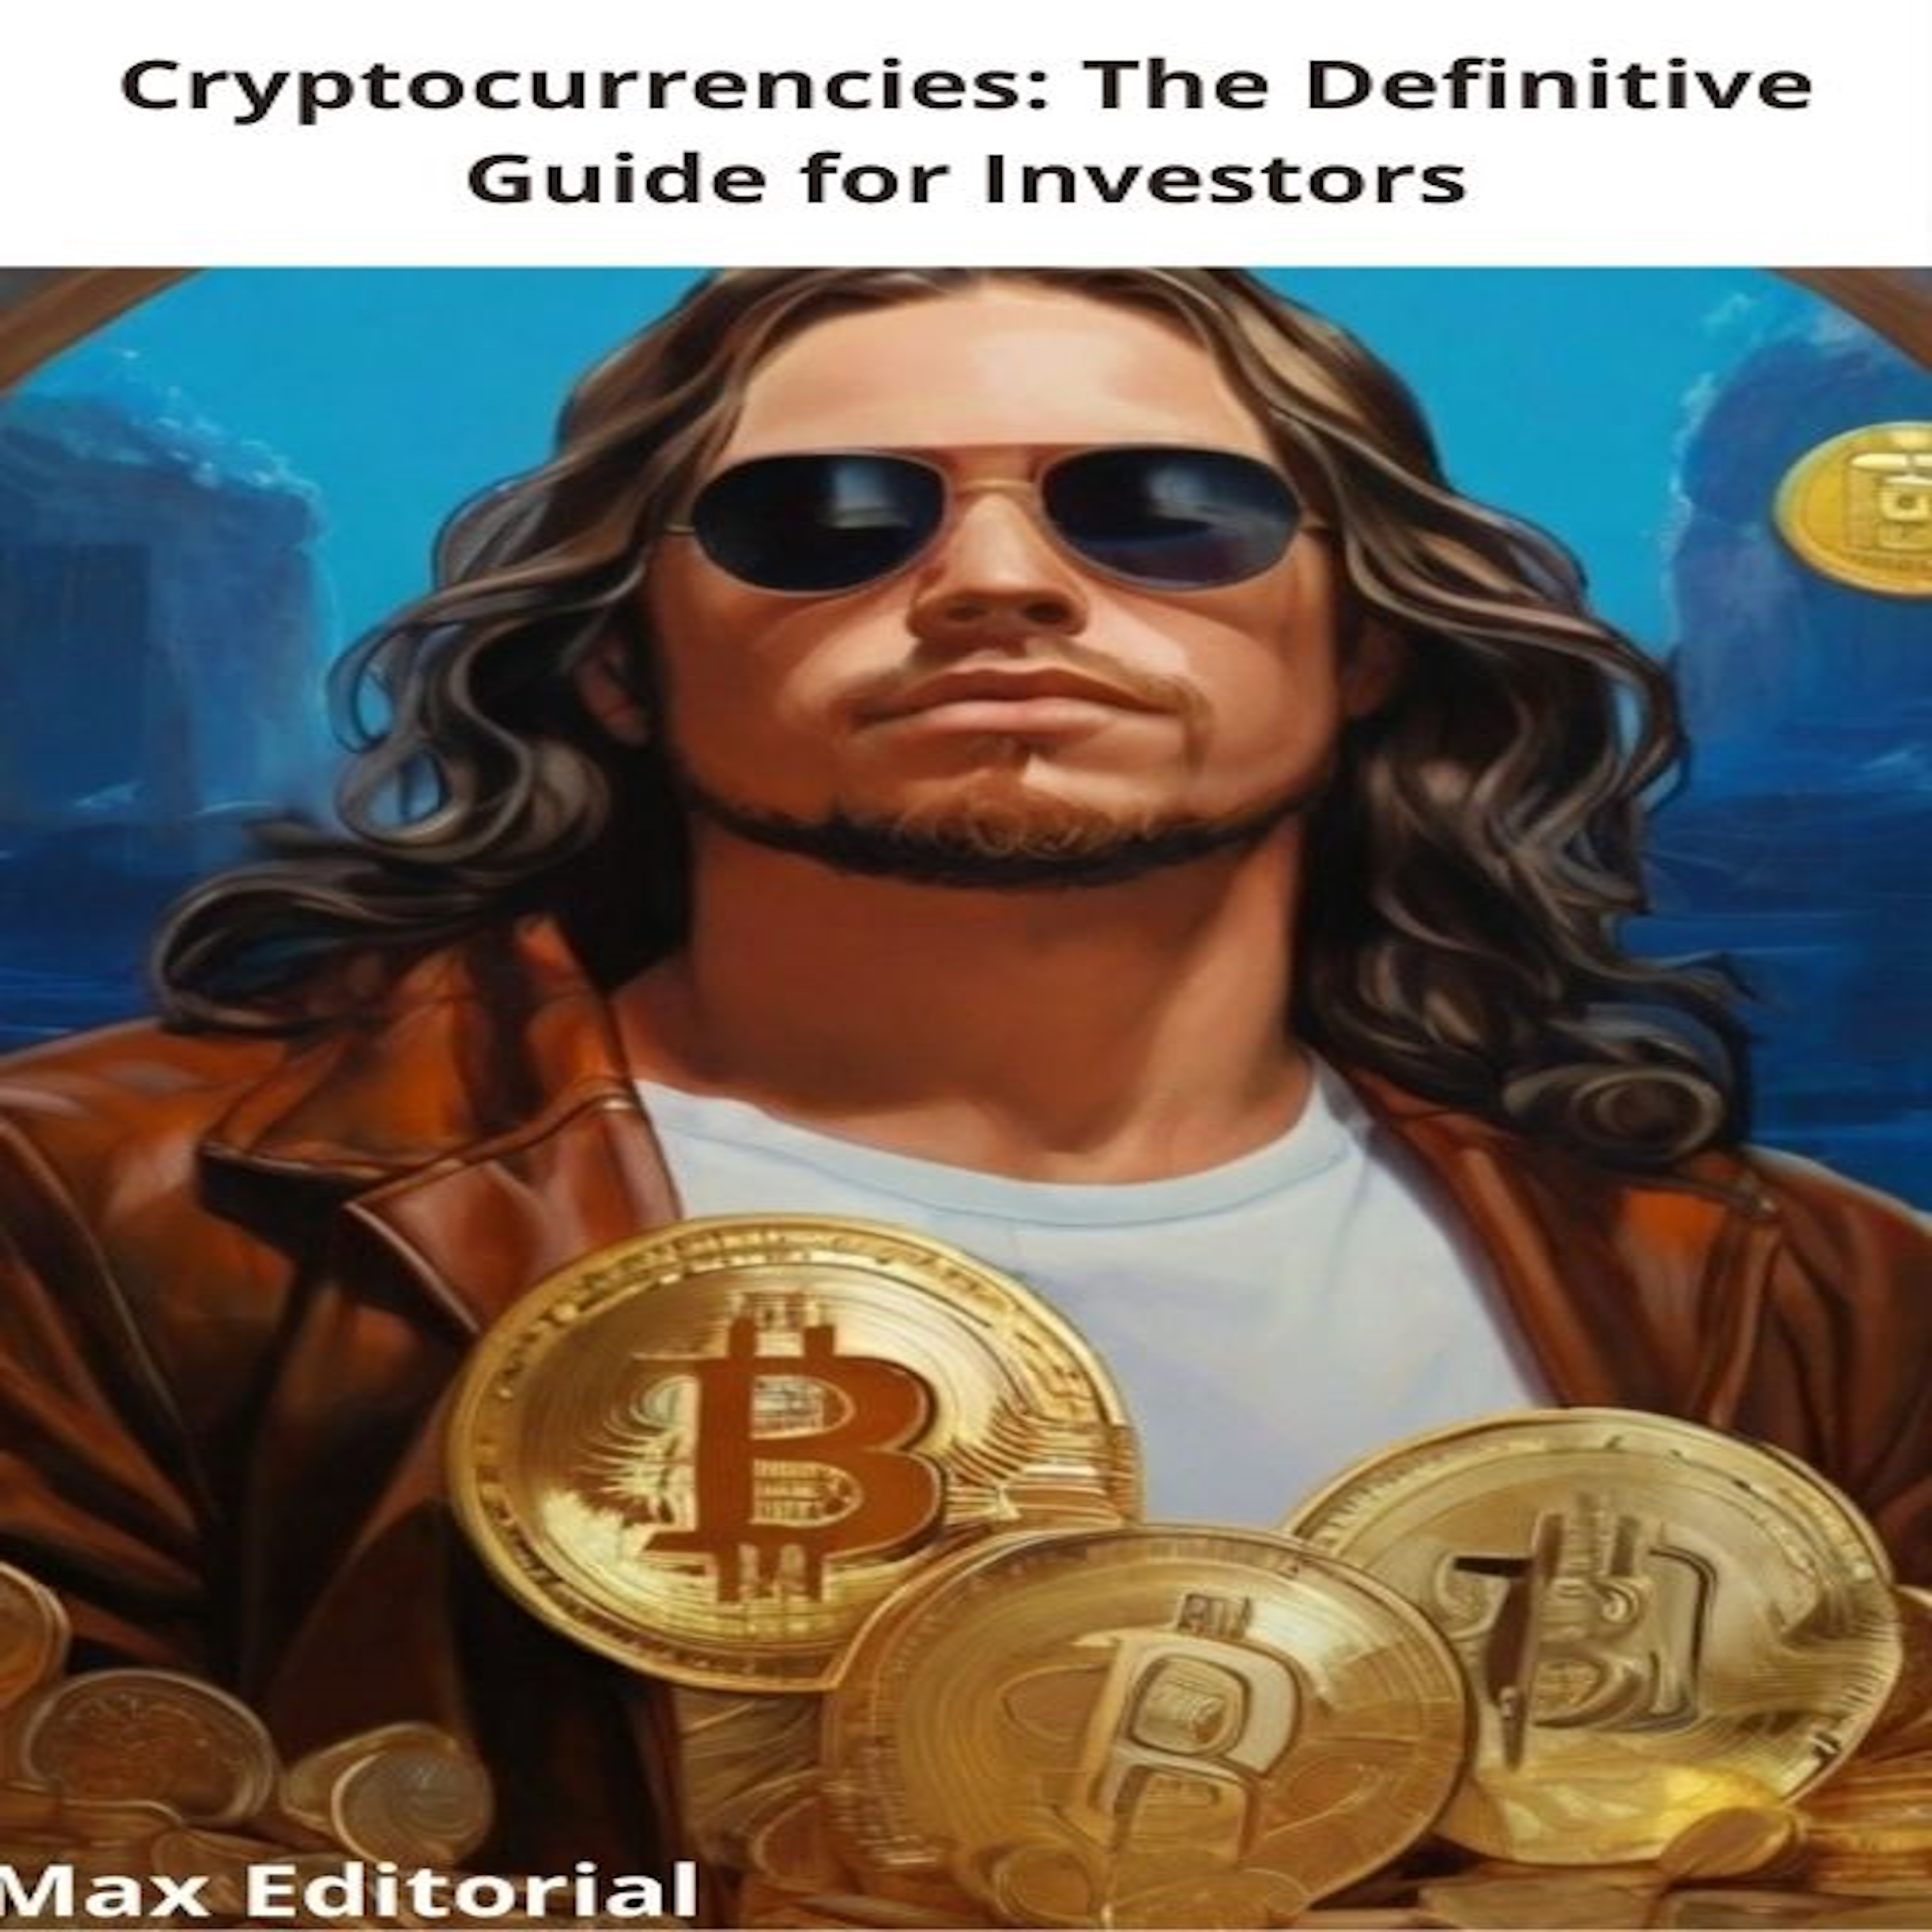 Cryptocurrencies: The Definitive Guide for Investors